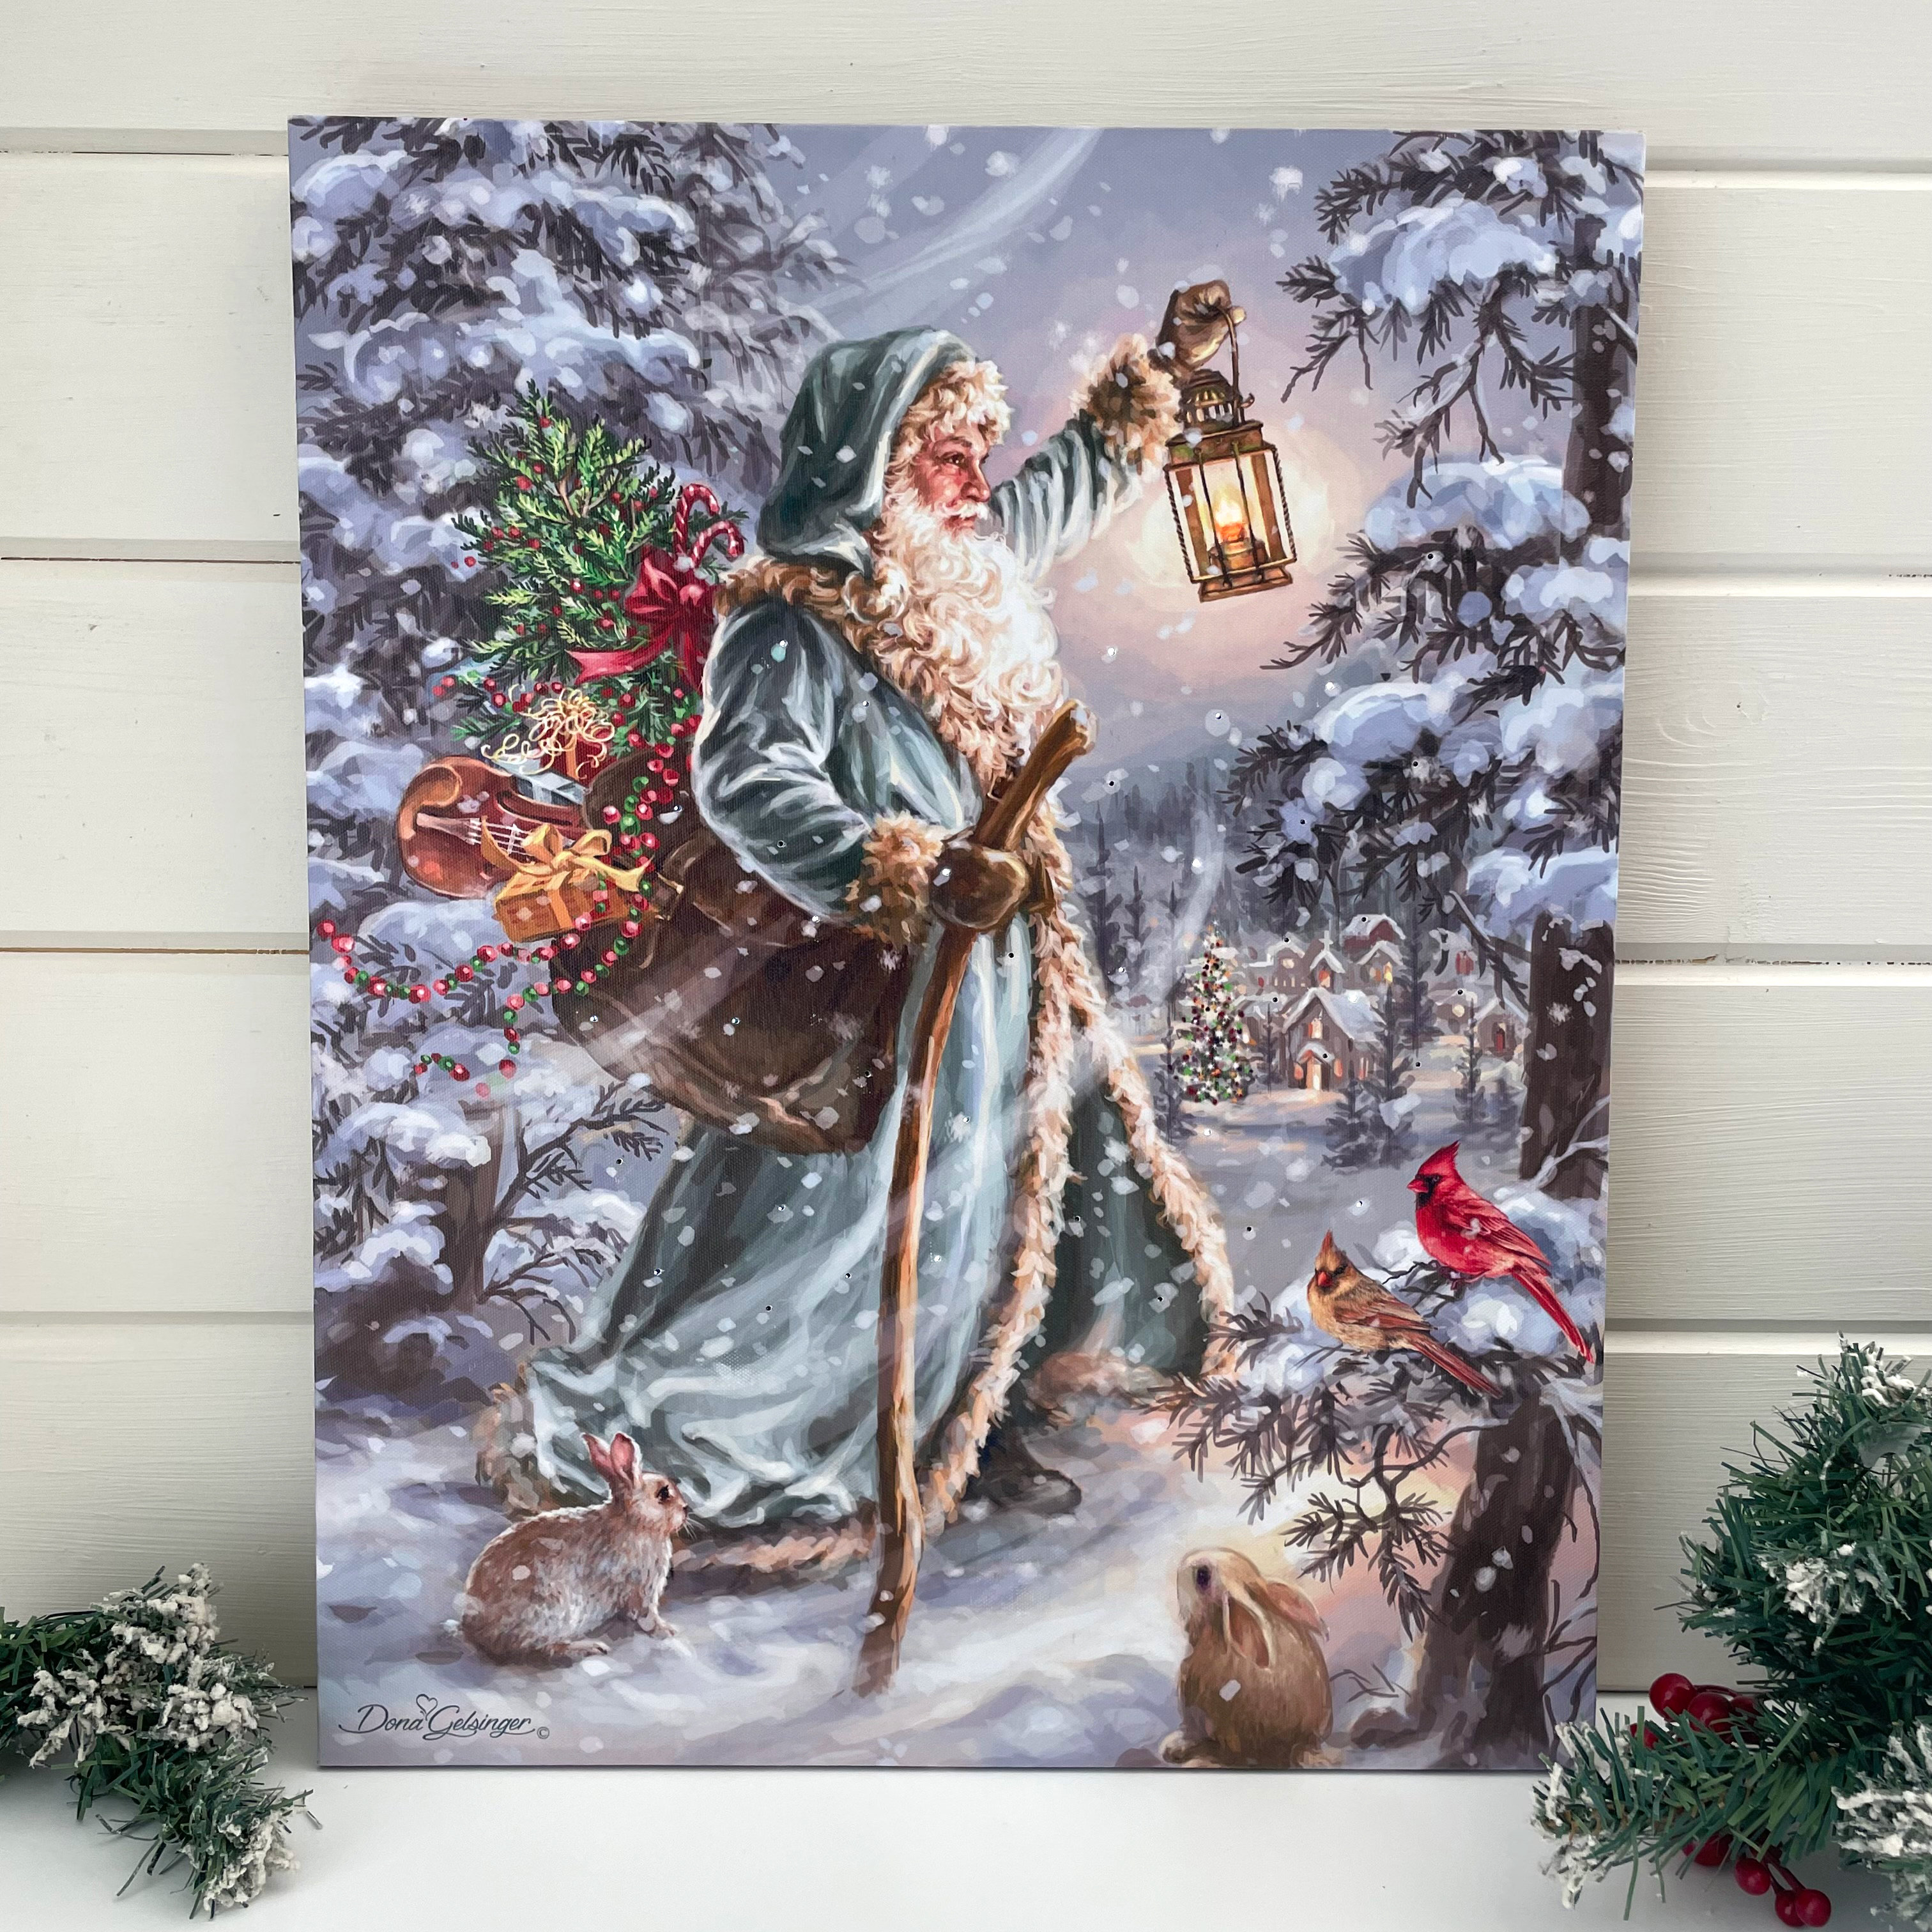 The Holiday Aisle® Lighted Fiber Optic and LED Canvas 16x20